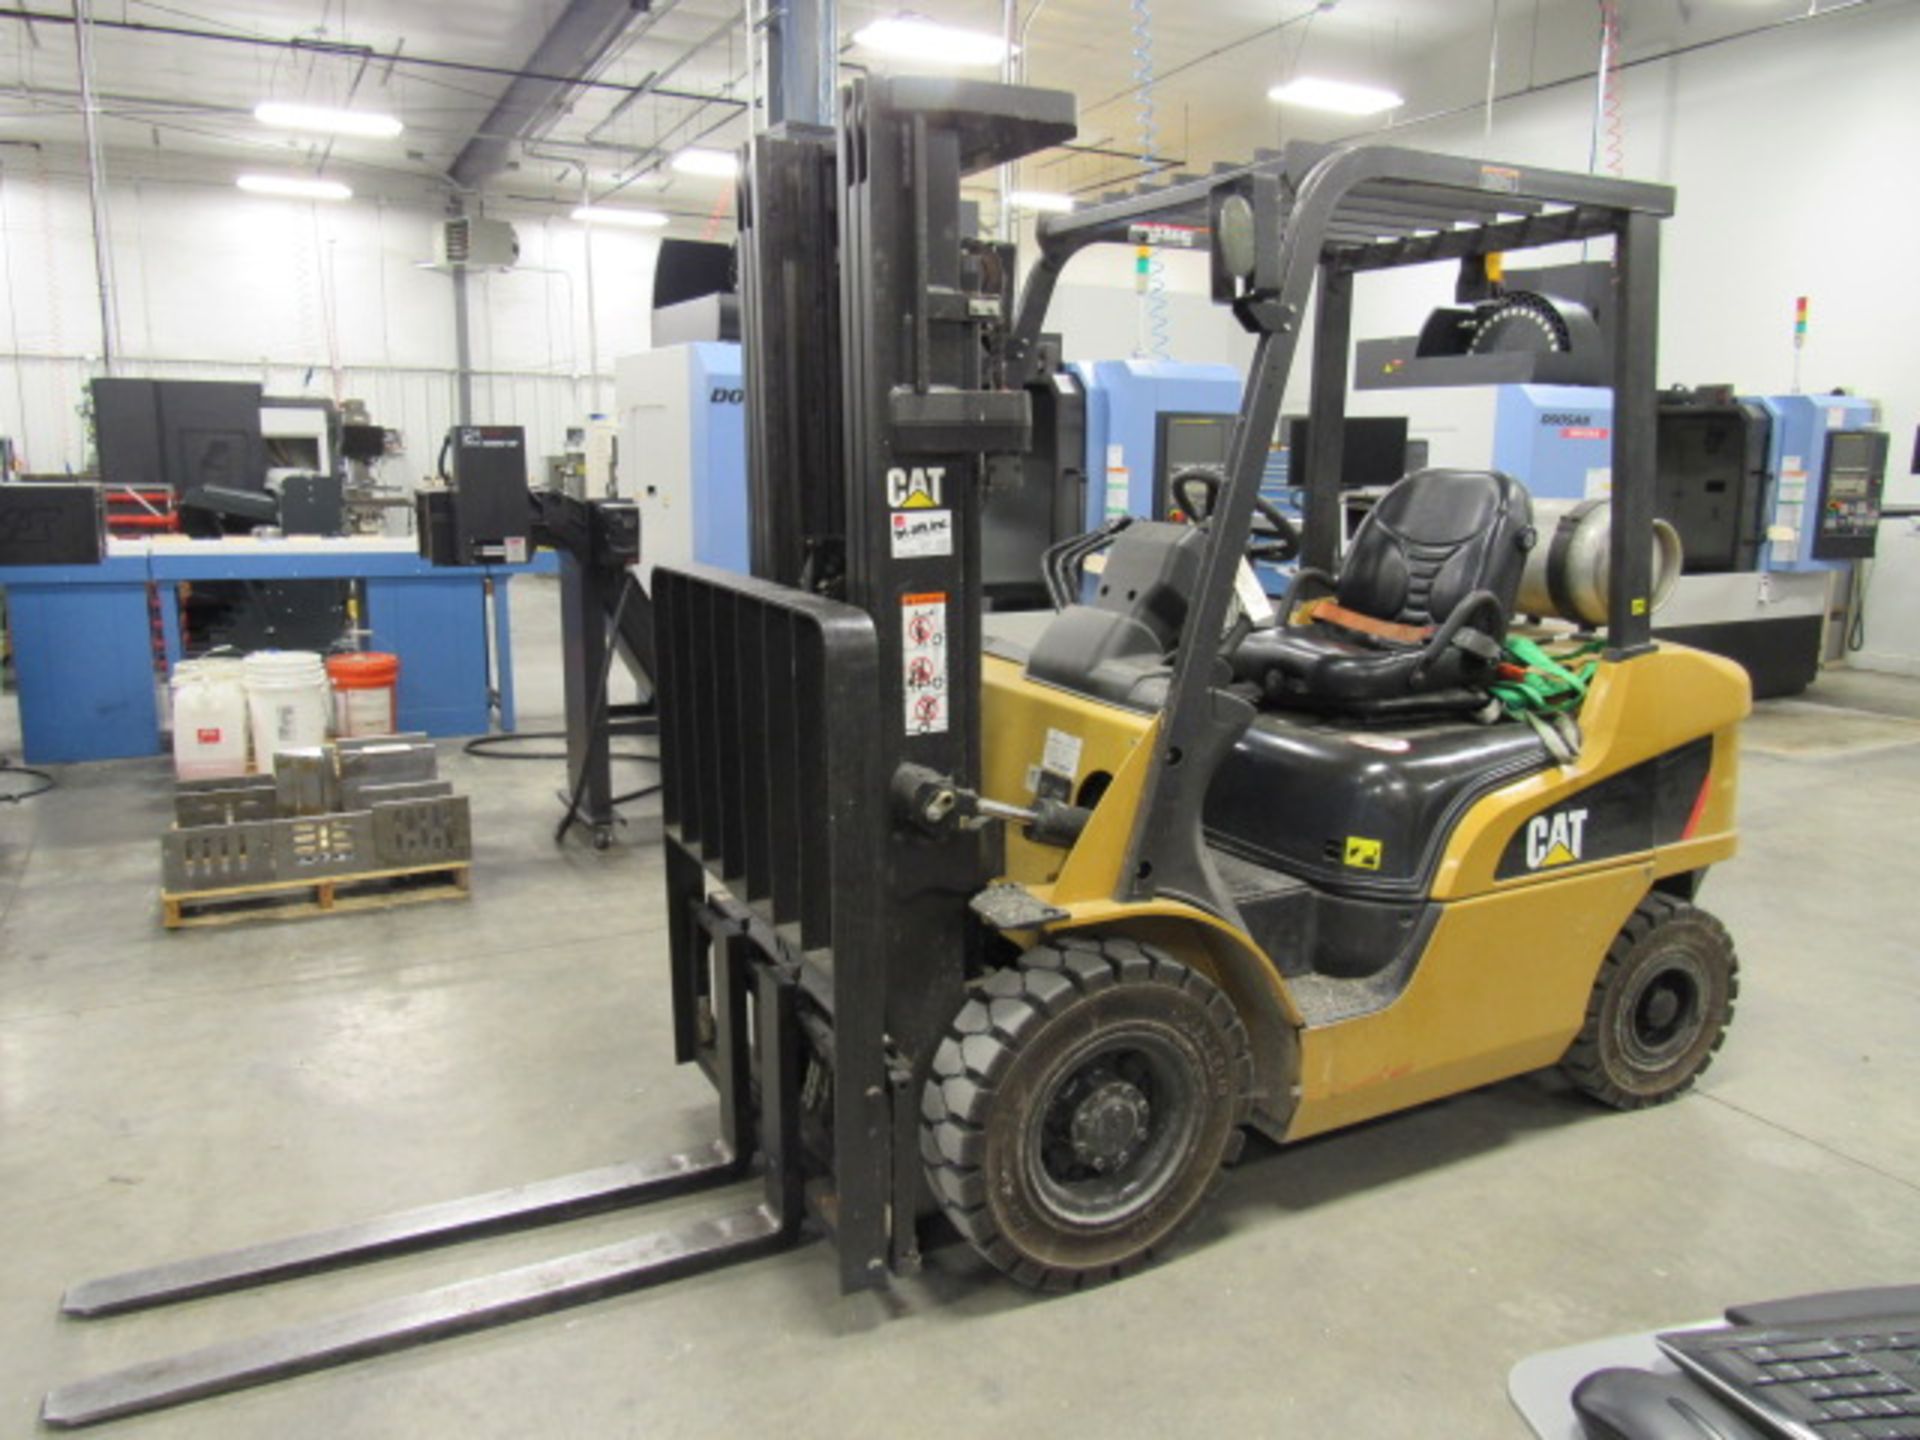 CAT Model 2P5000 5,000 lb. Capacity LP Forklift with Side Shift, Headlights, Safety Light, Outdoor - Image 2 of 8